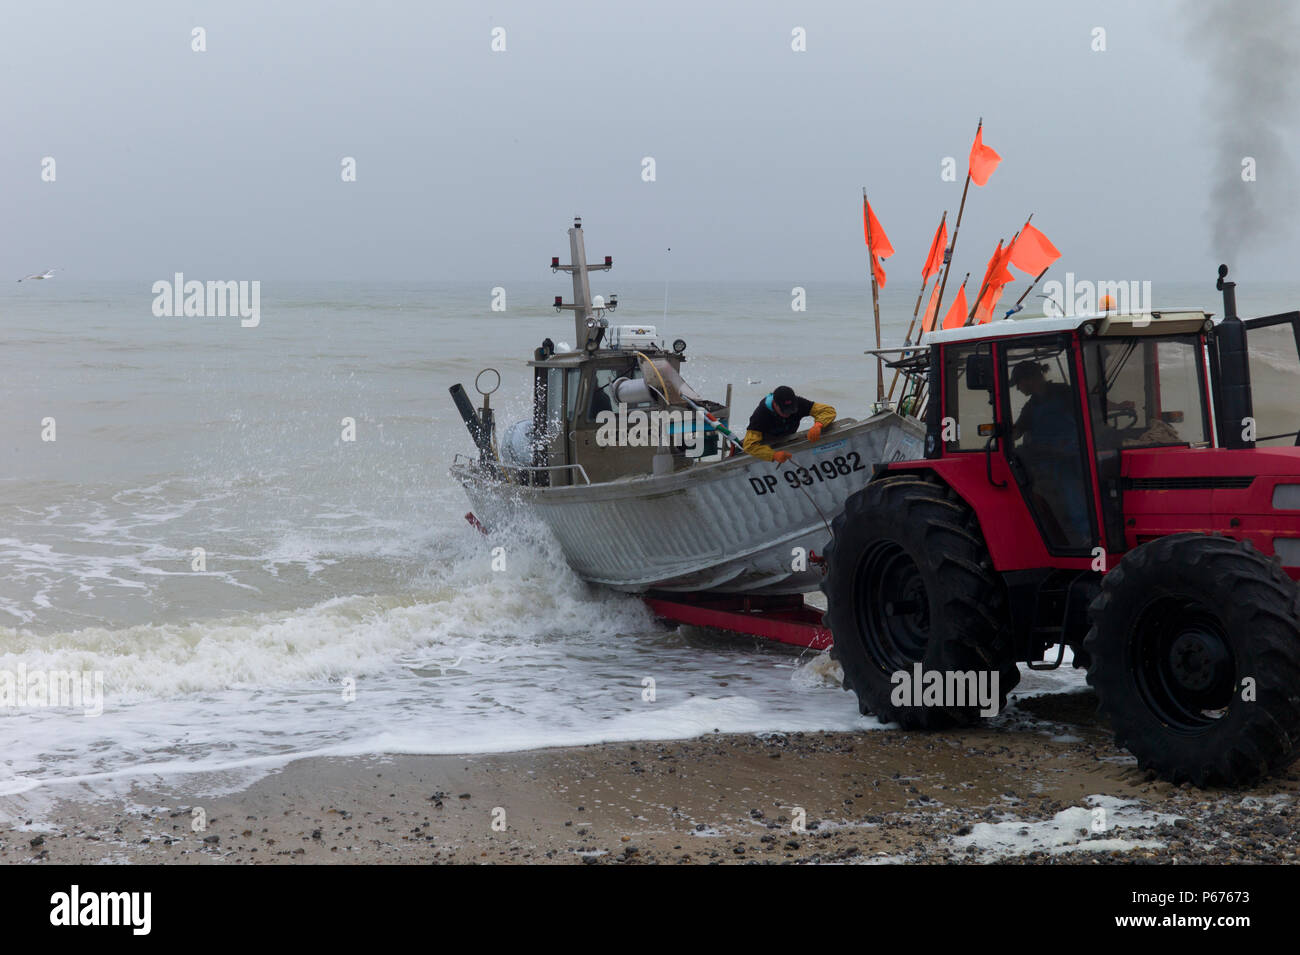 Tractor launching fishing boat, Normandy, France Stock Photo